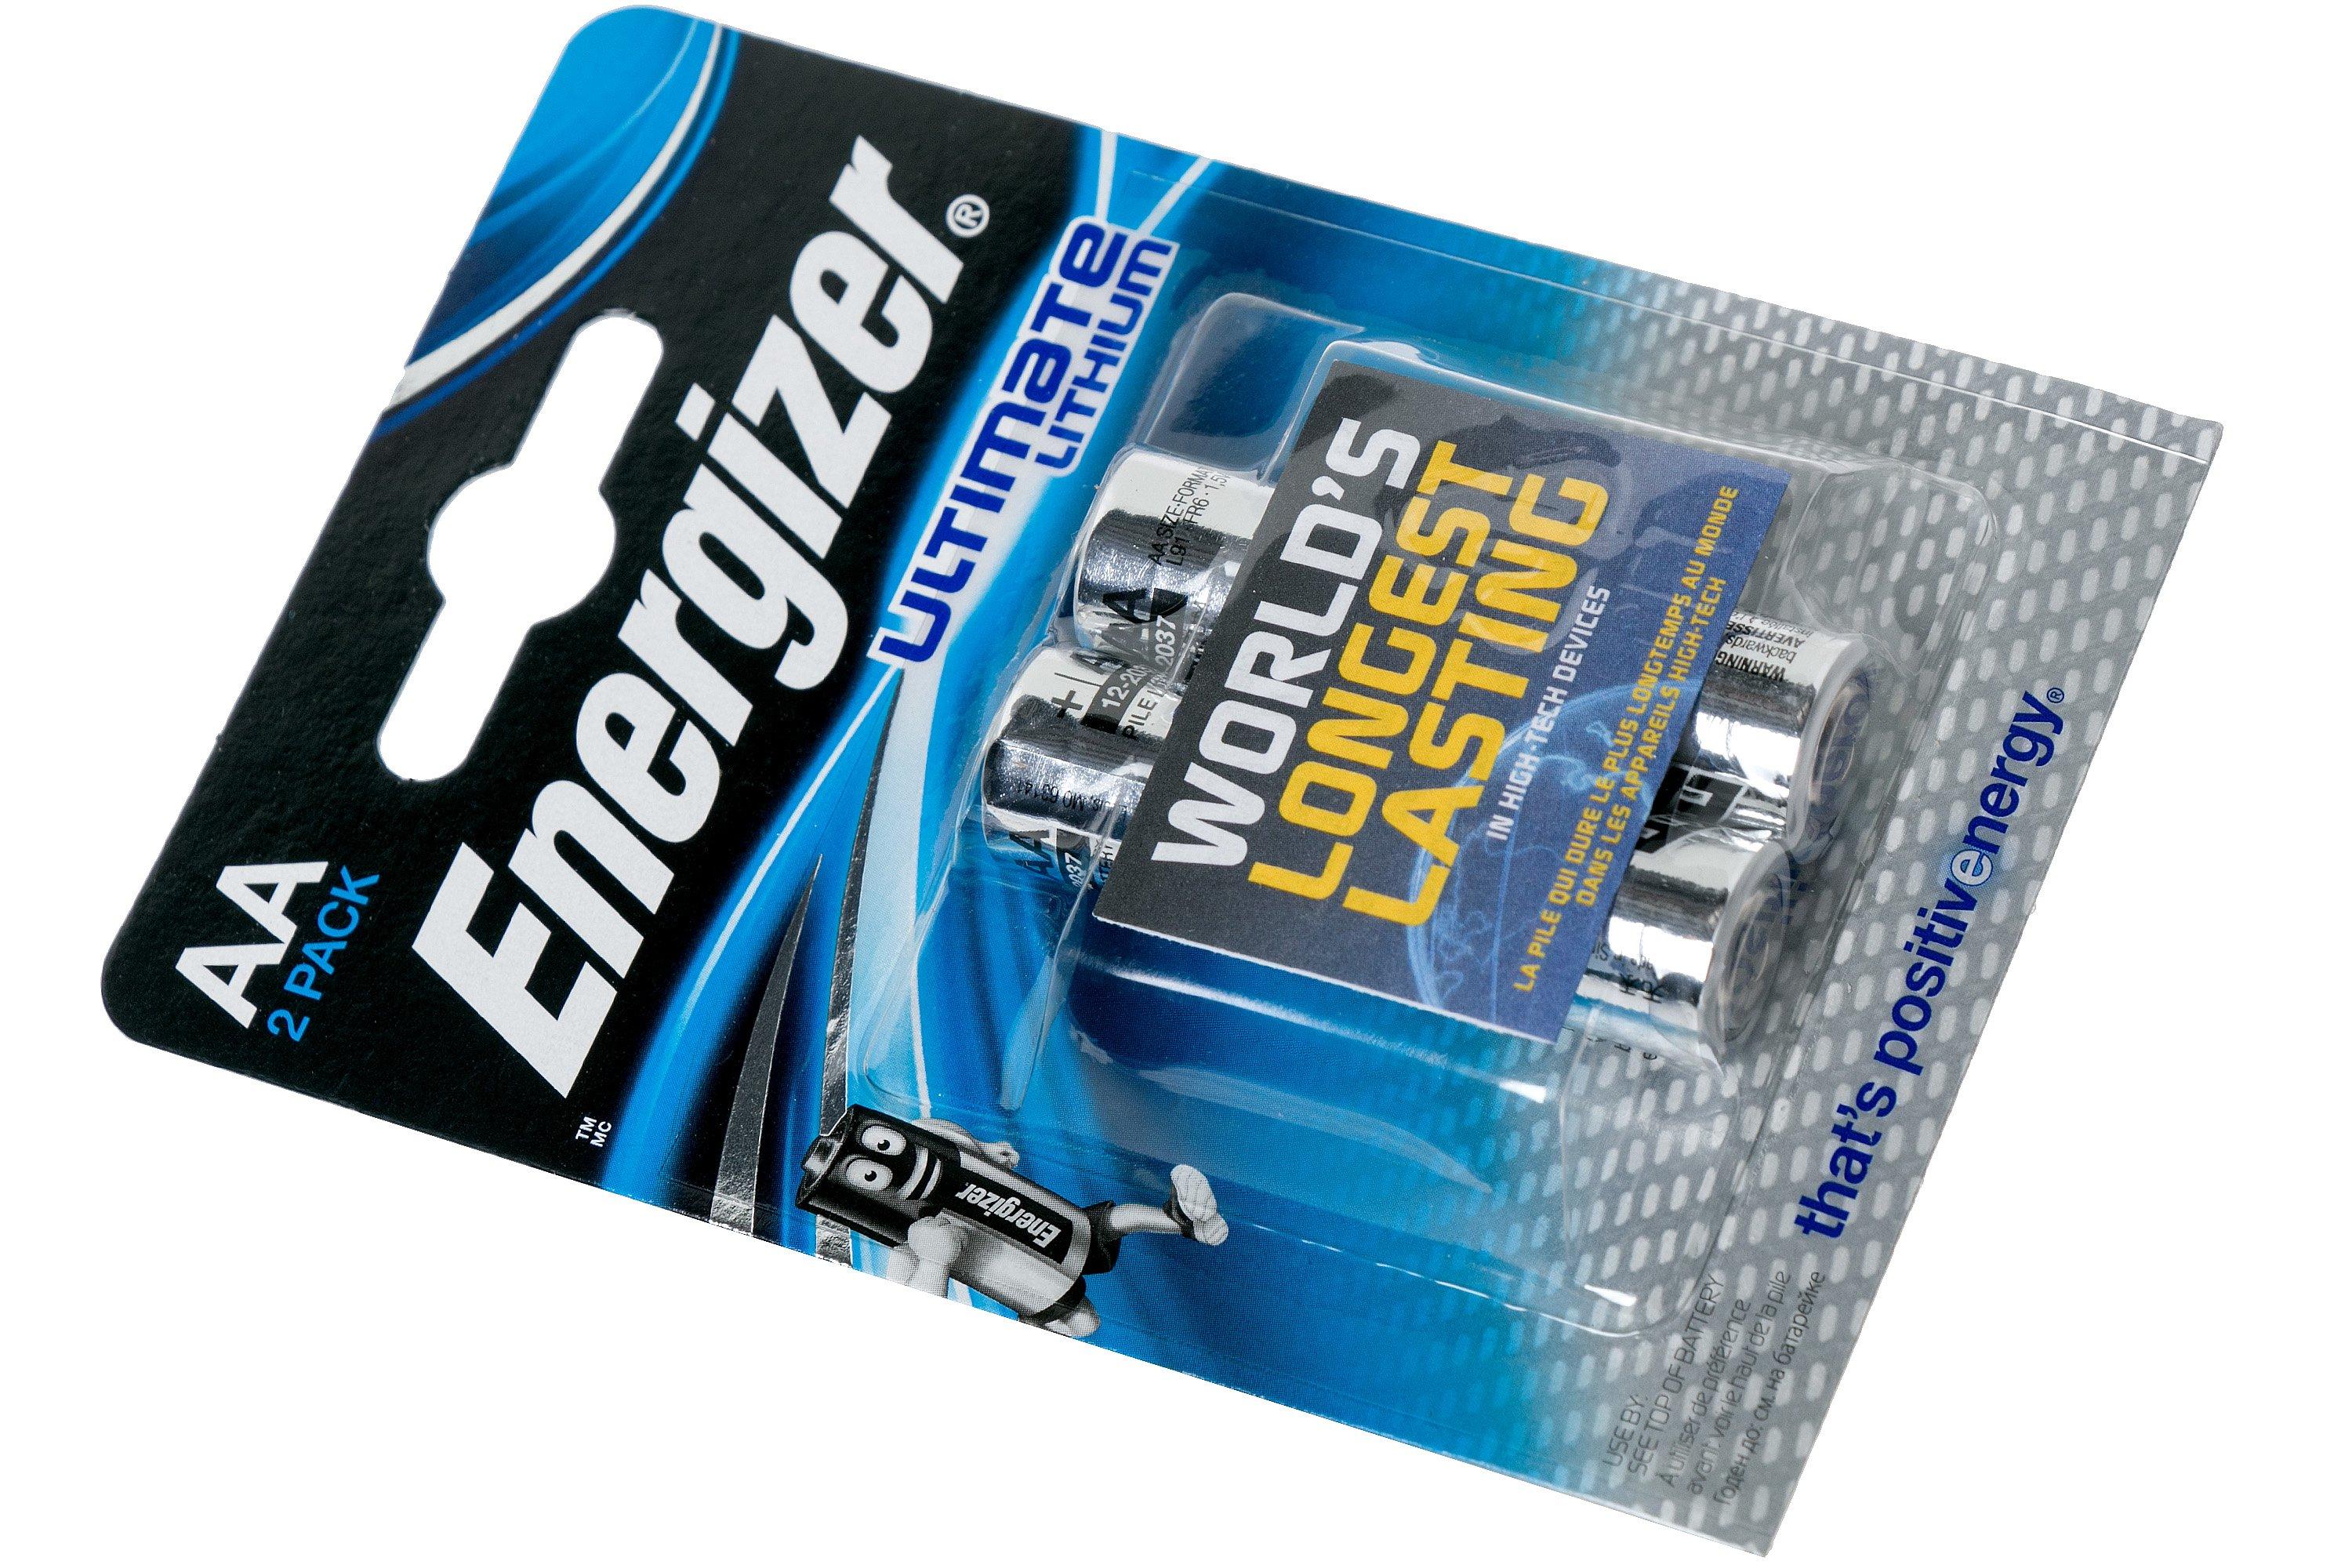 Pile Energizer® Ultimate Lithium – AA